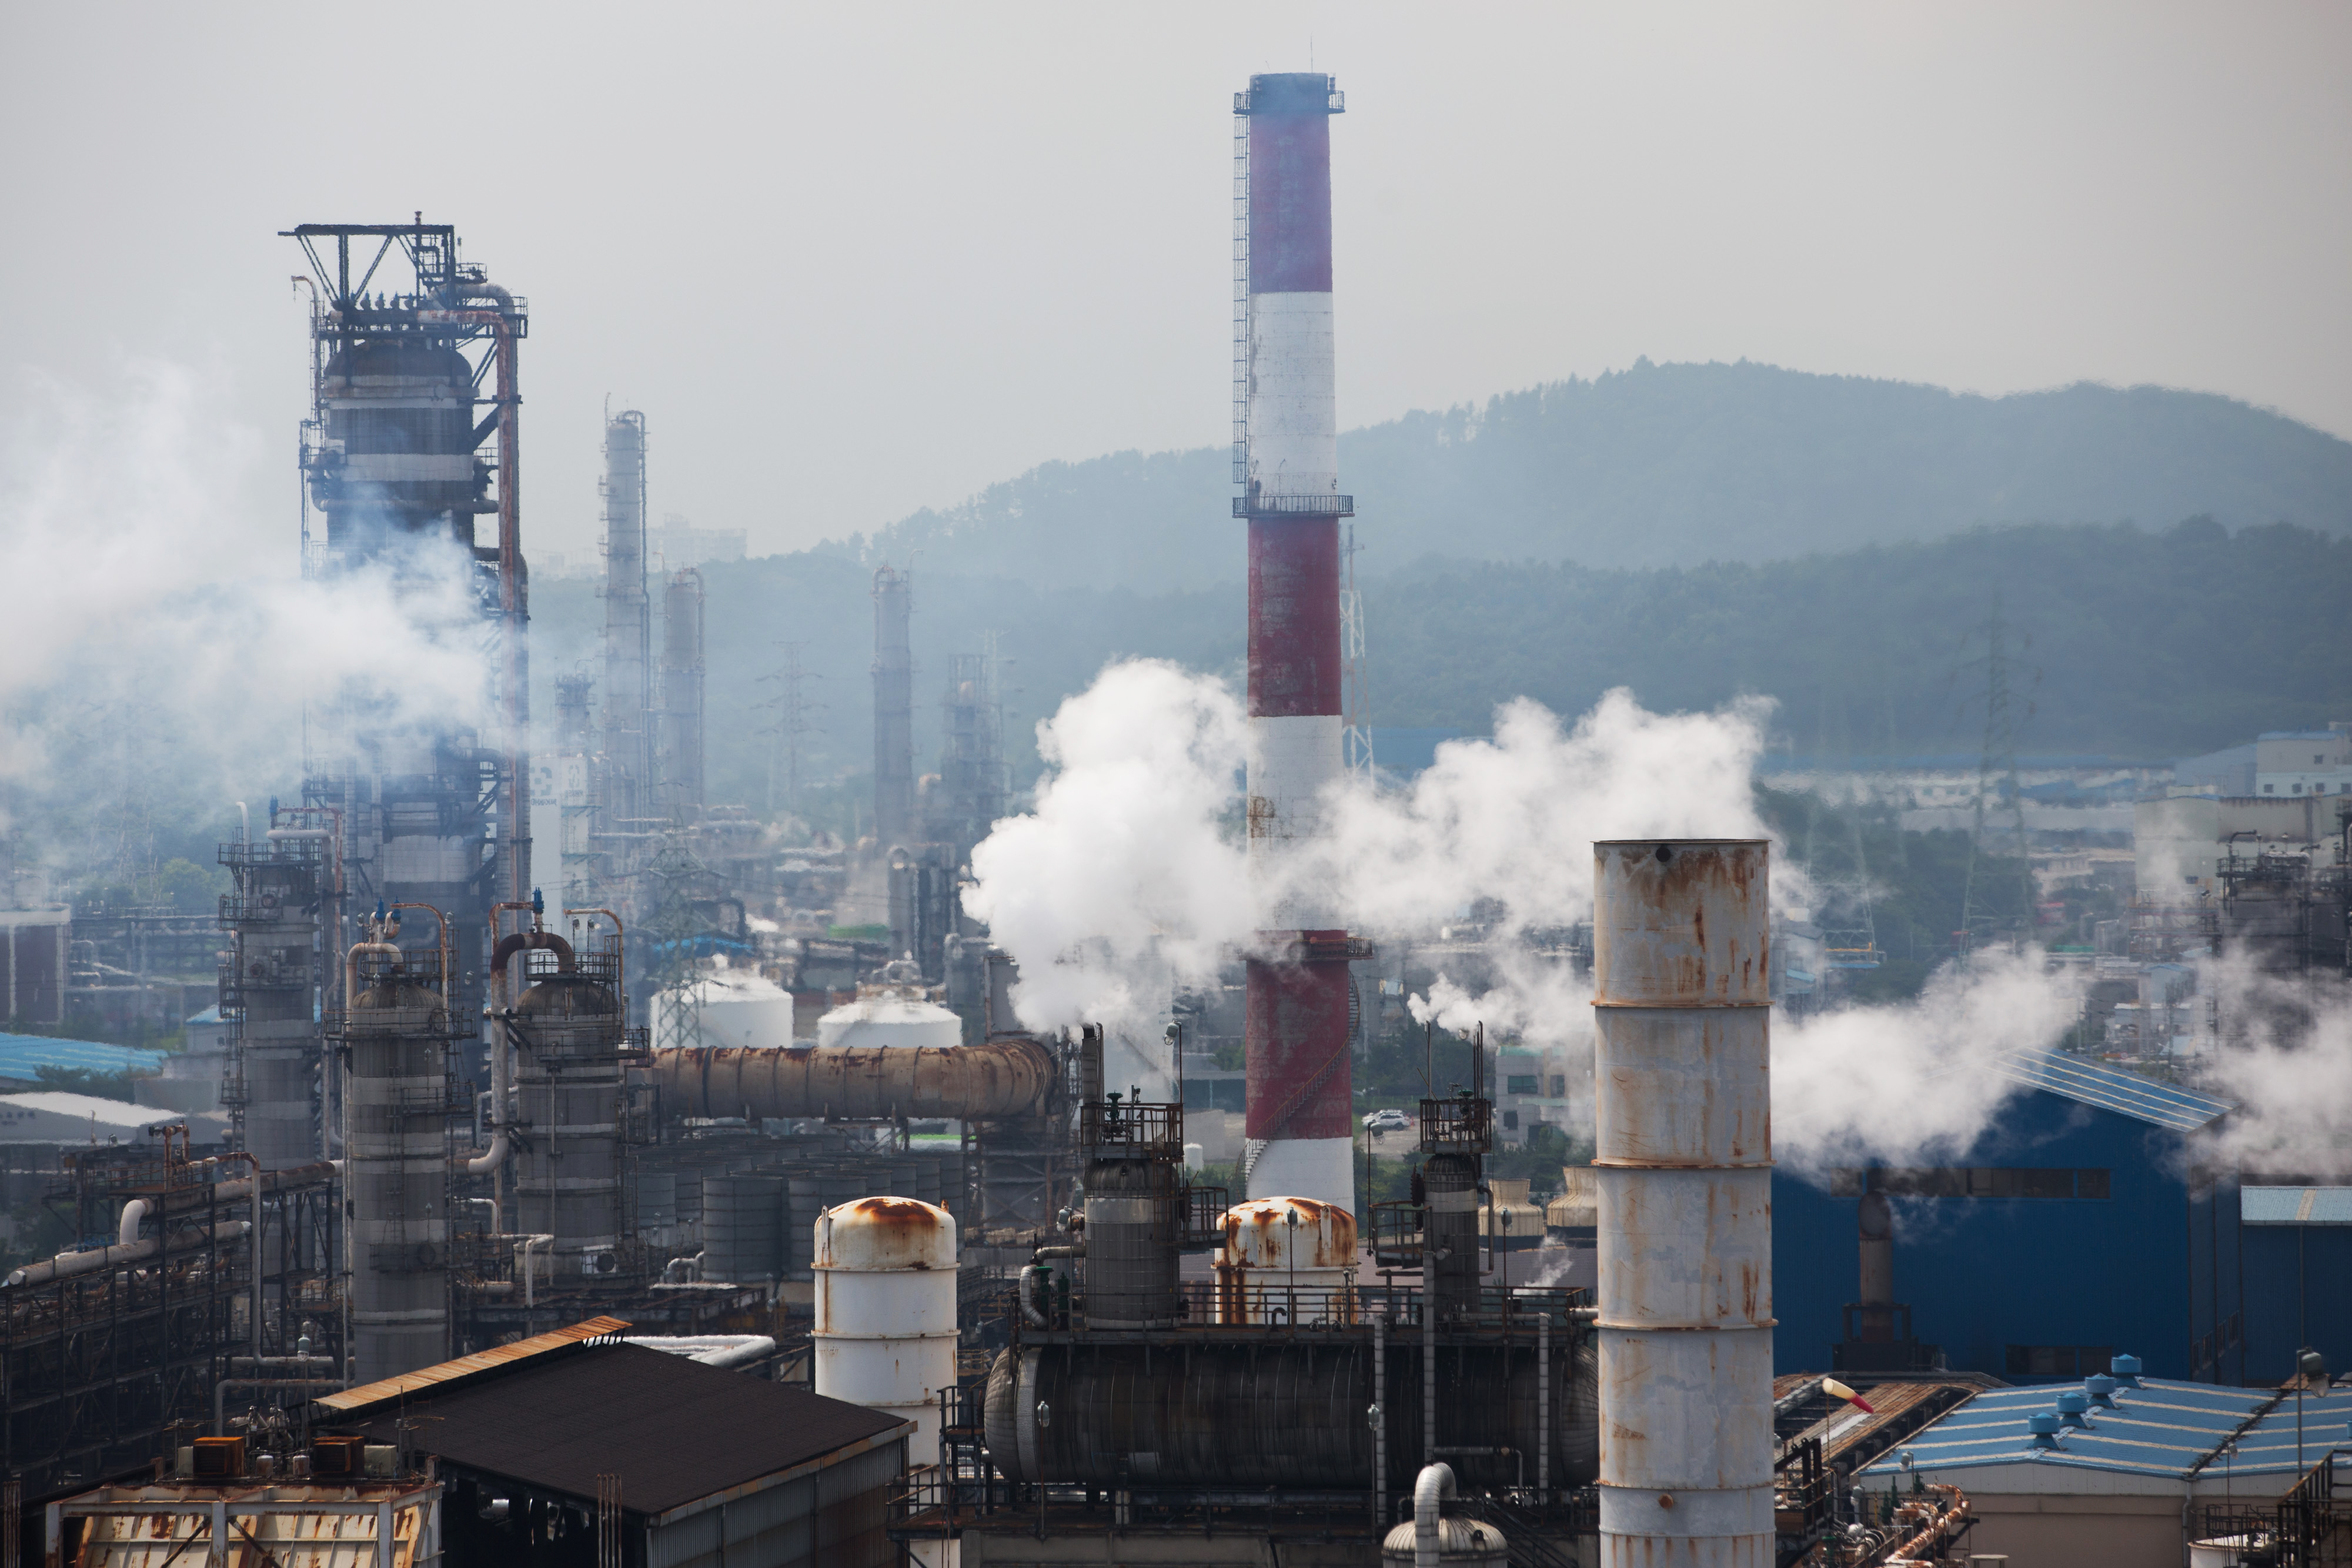 SK Innovation Co.'s Ulsan Complex oil refinery facilities operate in Ulsan, South Korea, on Tuesday, July 21, 2015. (SeongJoon Cho—Bloomberg / Getty Images)